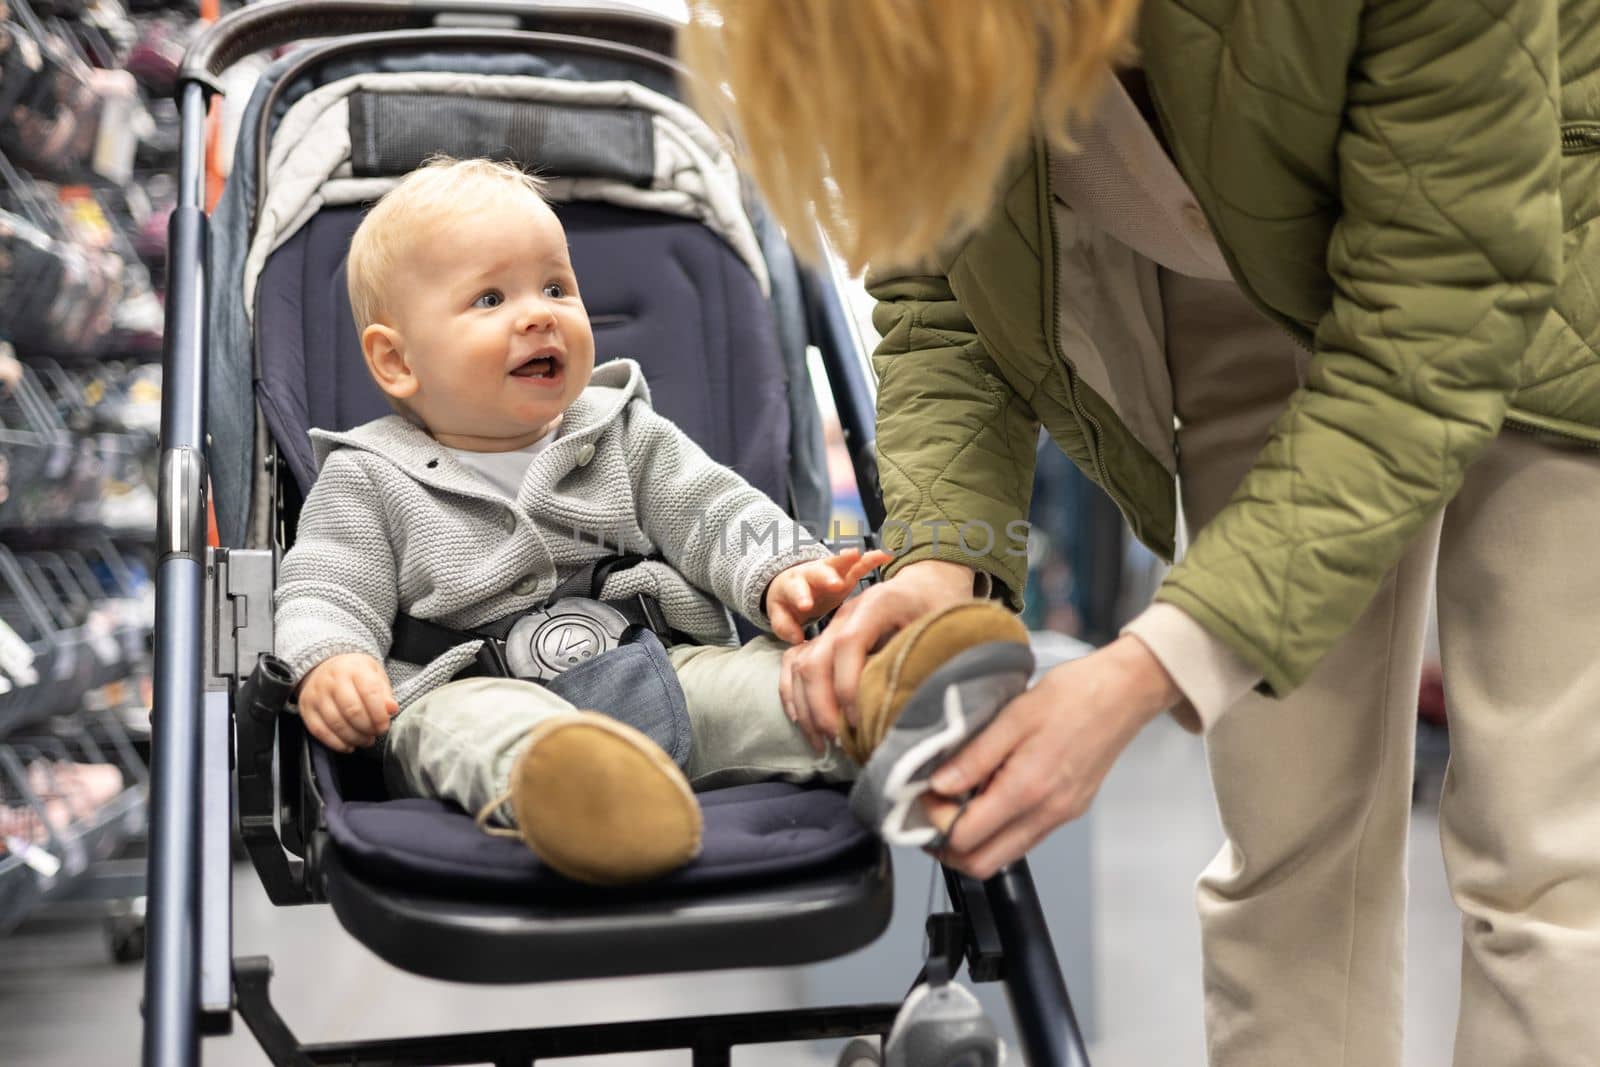 Casualy dressed mother choosing sporty shoes and clothes products in sports department of supermarket store with her infant baby boy child in stroller